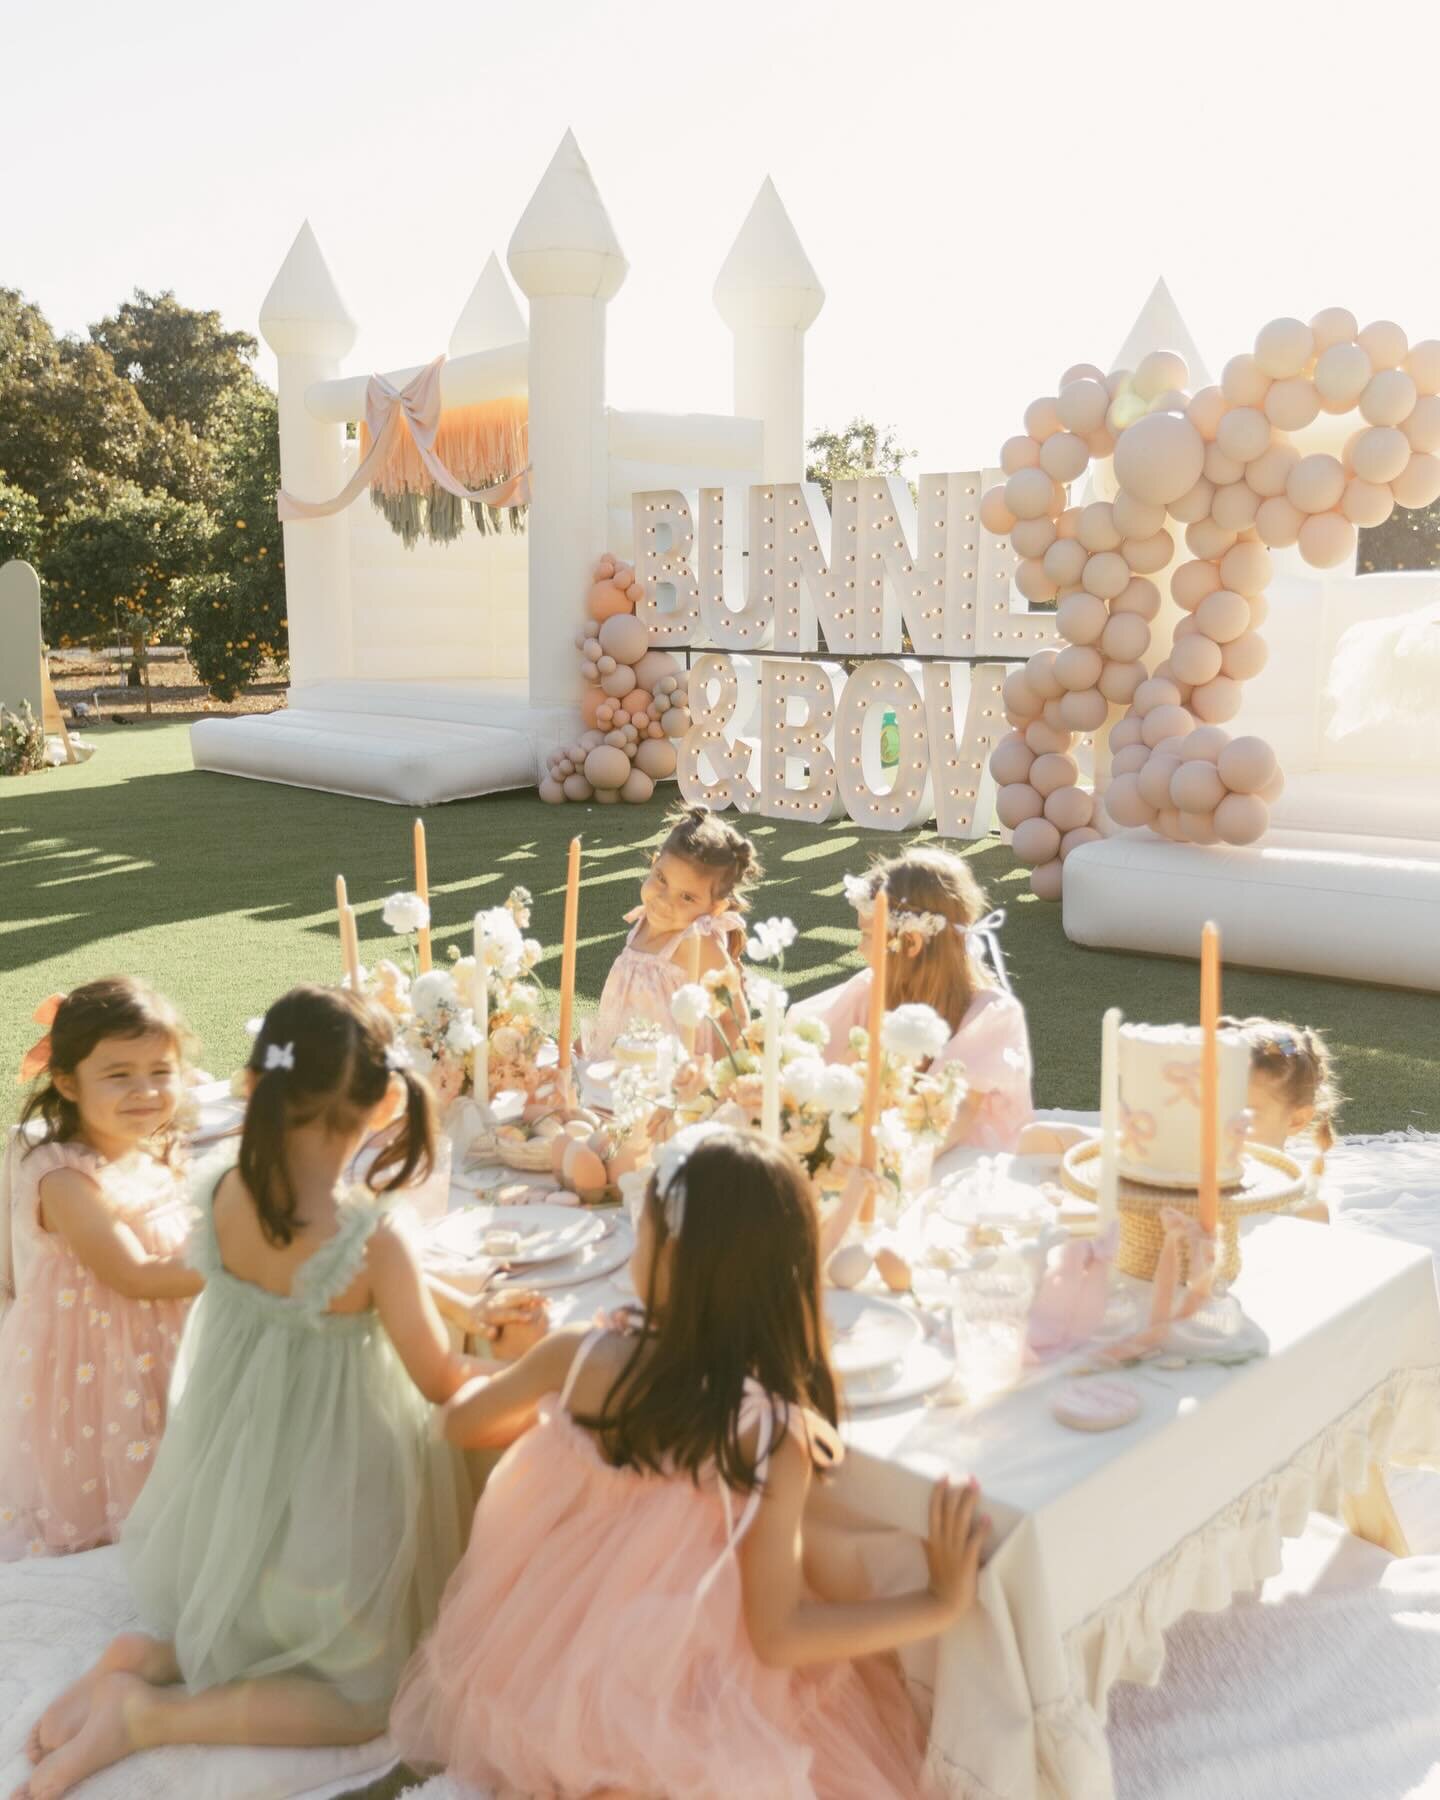 Happy, hoppy Easter from our Inflate Fam to yours 🤍🎀🐰

Photographer: @salome_palomino
Planning, design, backdrops, balloons + picnic set up:
@rentbohobabes
Planning and bounce house: @inflatesandiego
Venue: @ranchoguejitoweddings
Acrylic Signage +